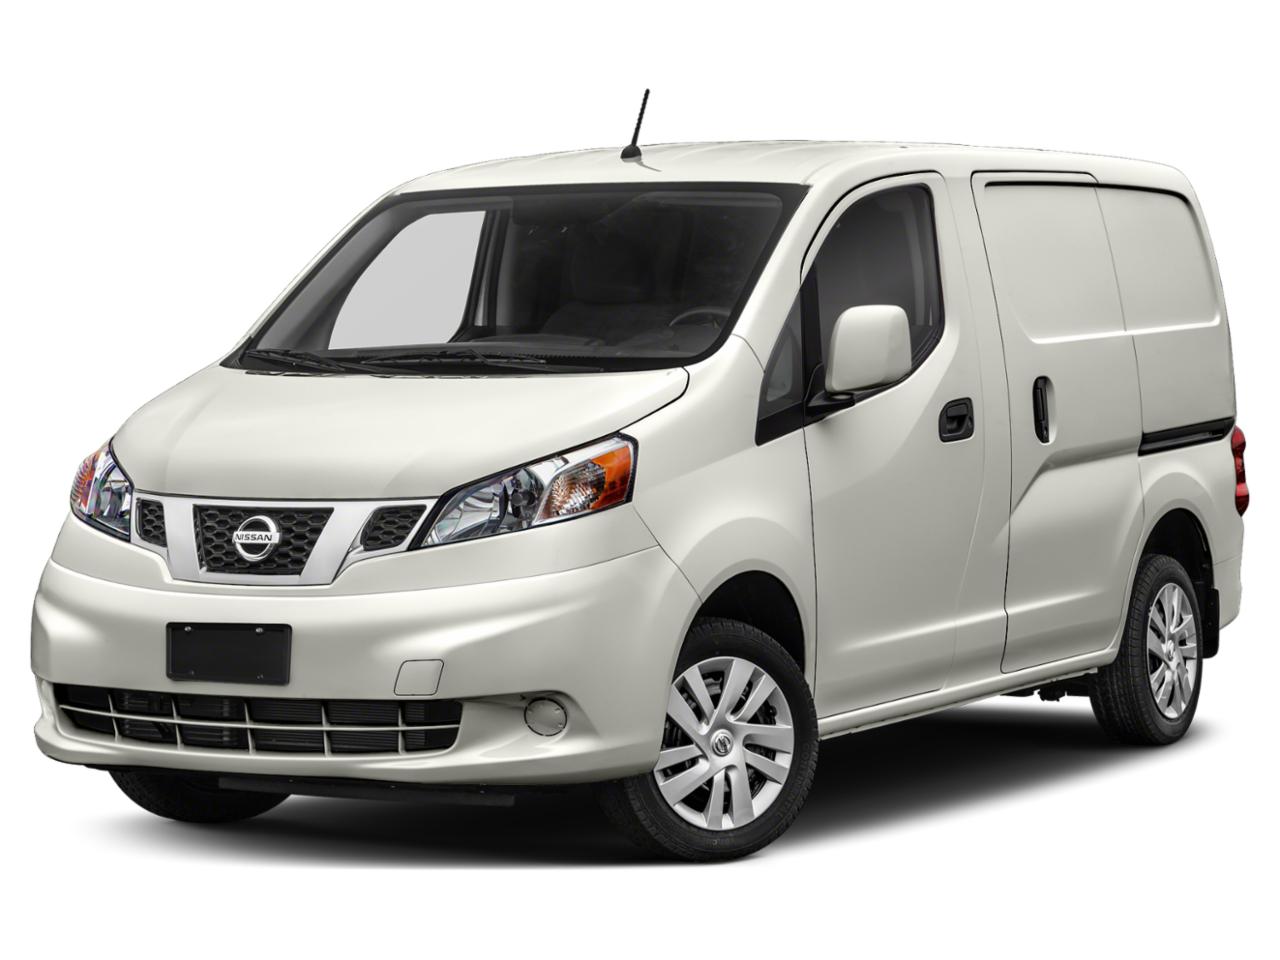 2021 Nissan NV200 Compact Cargo Vehicle Photo in MEDINA, OH 44256-9631